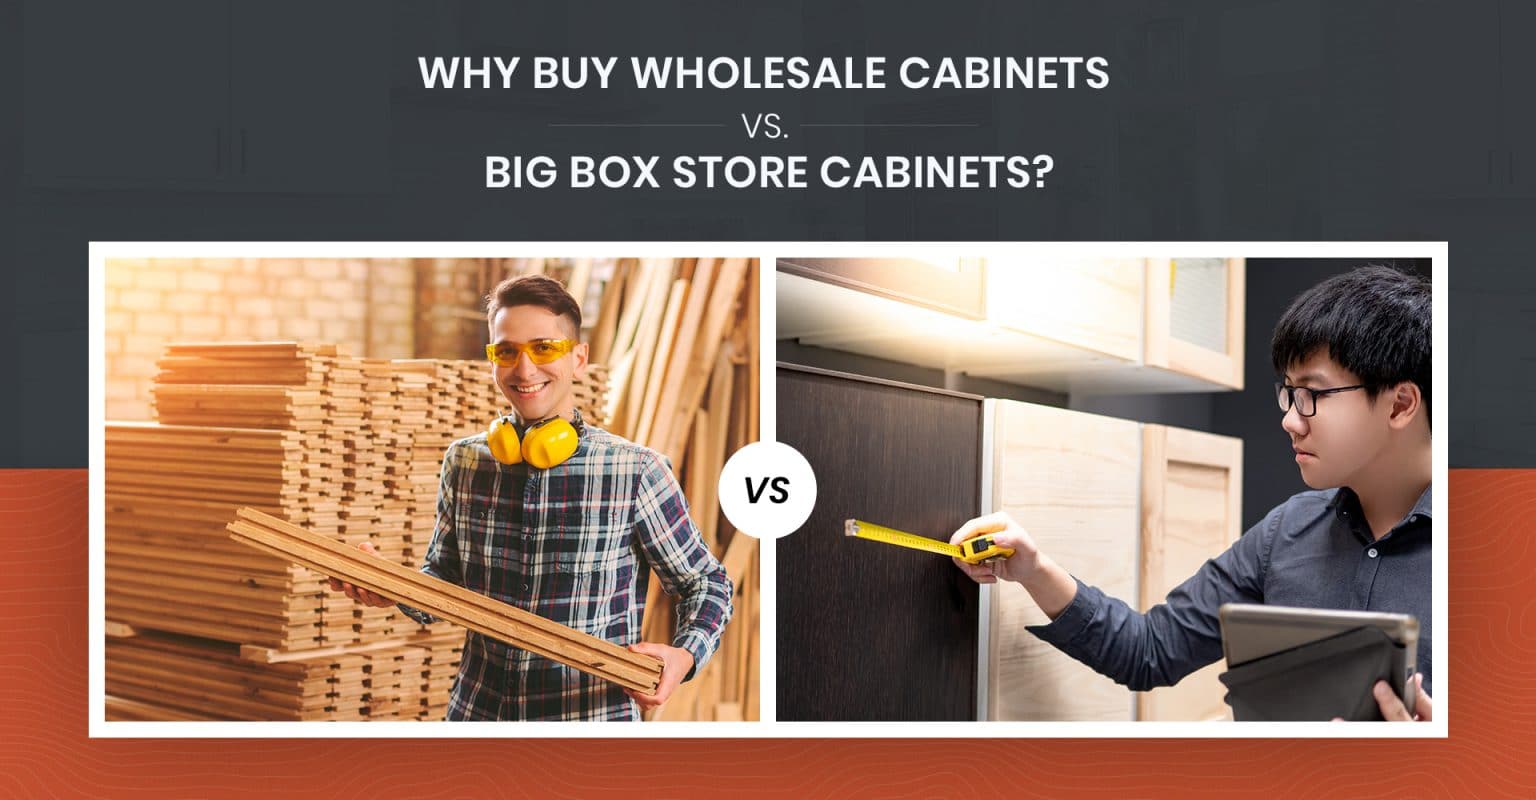 Why Buy Wholesale Cabinets Vs. Big Box Store Cabinets?